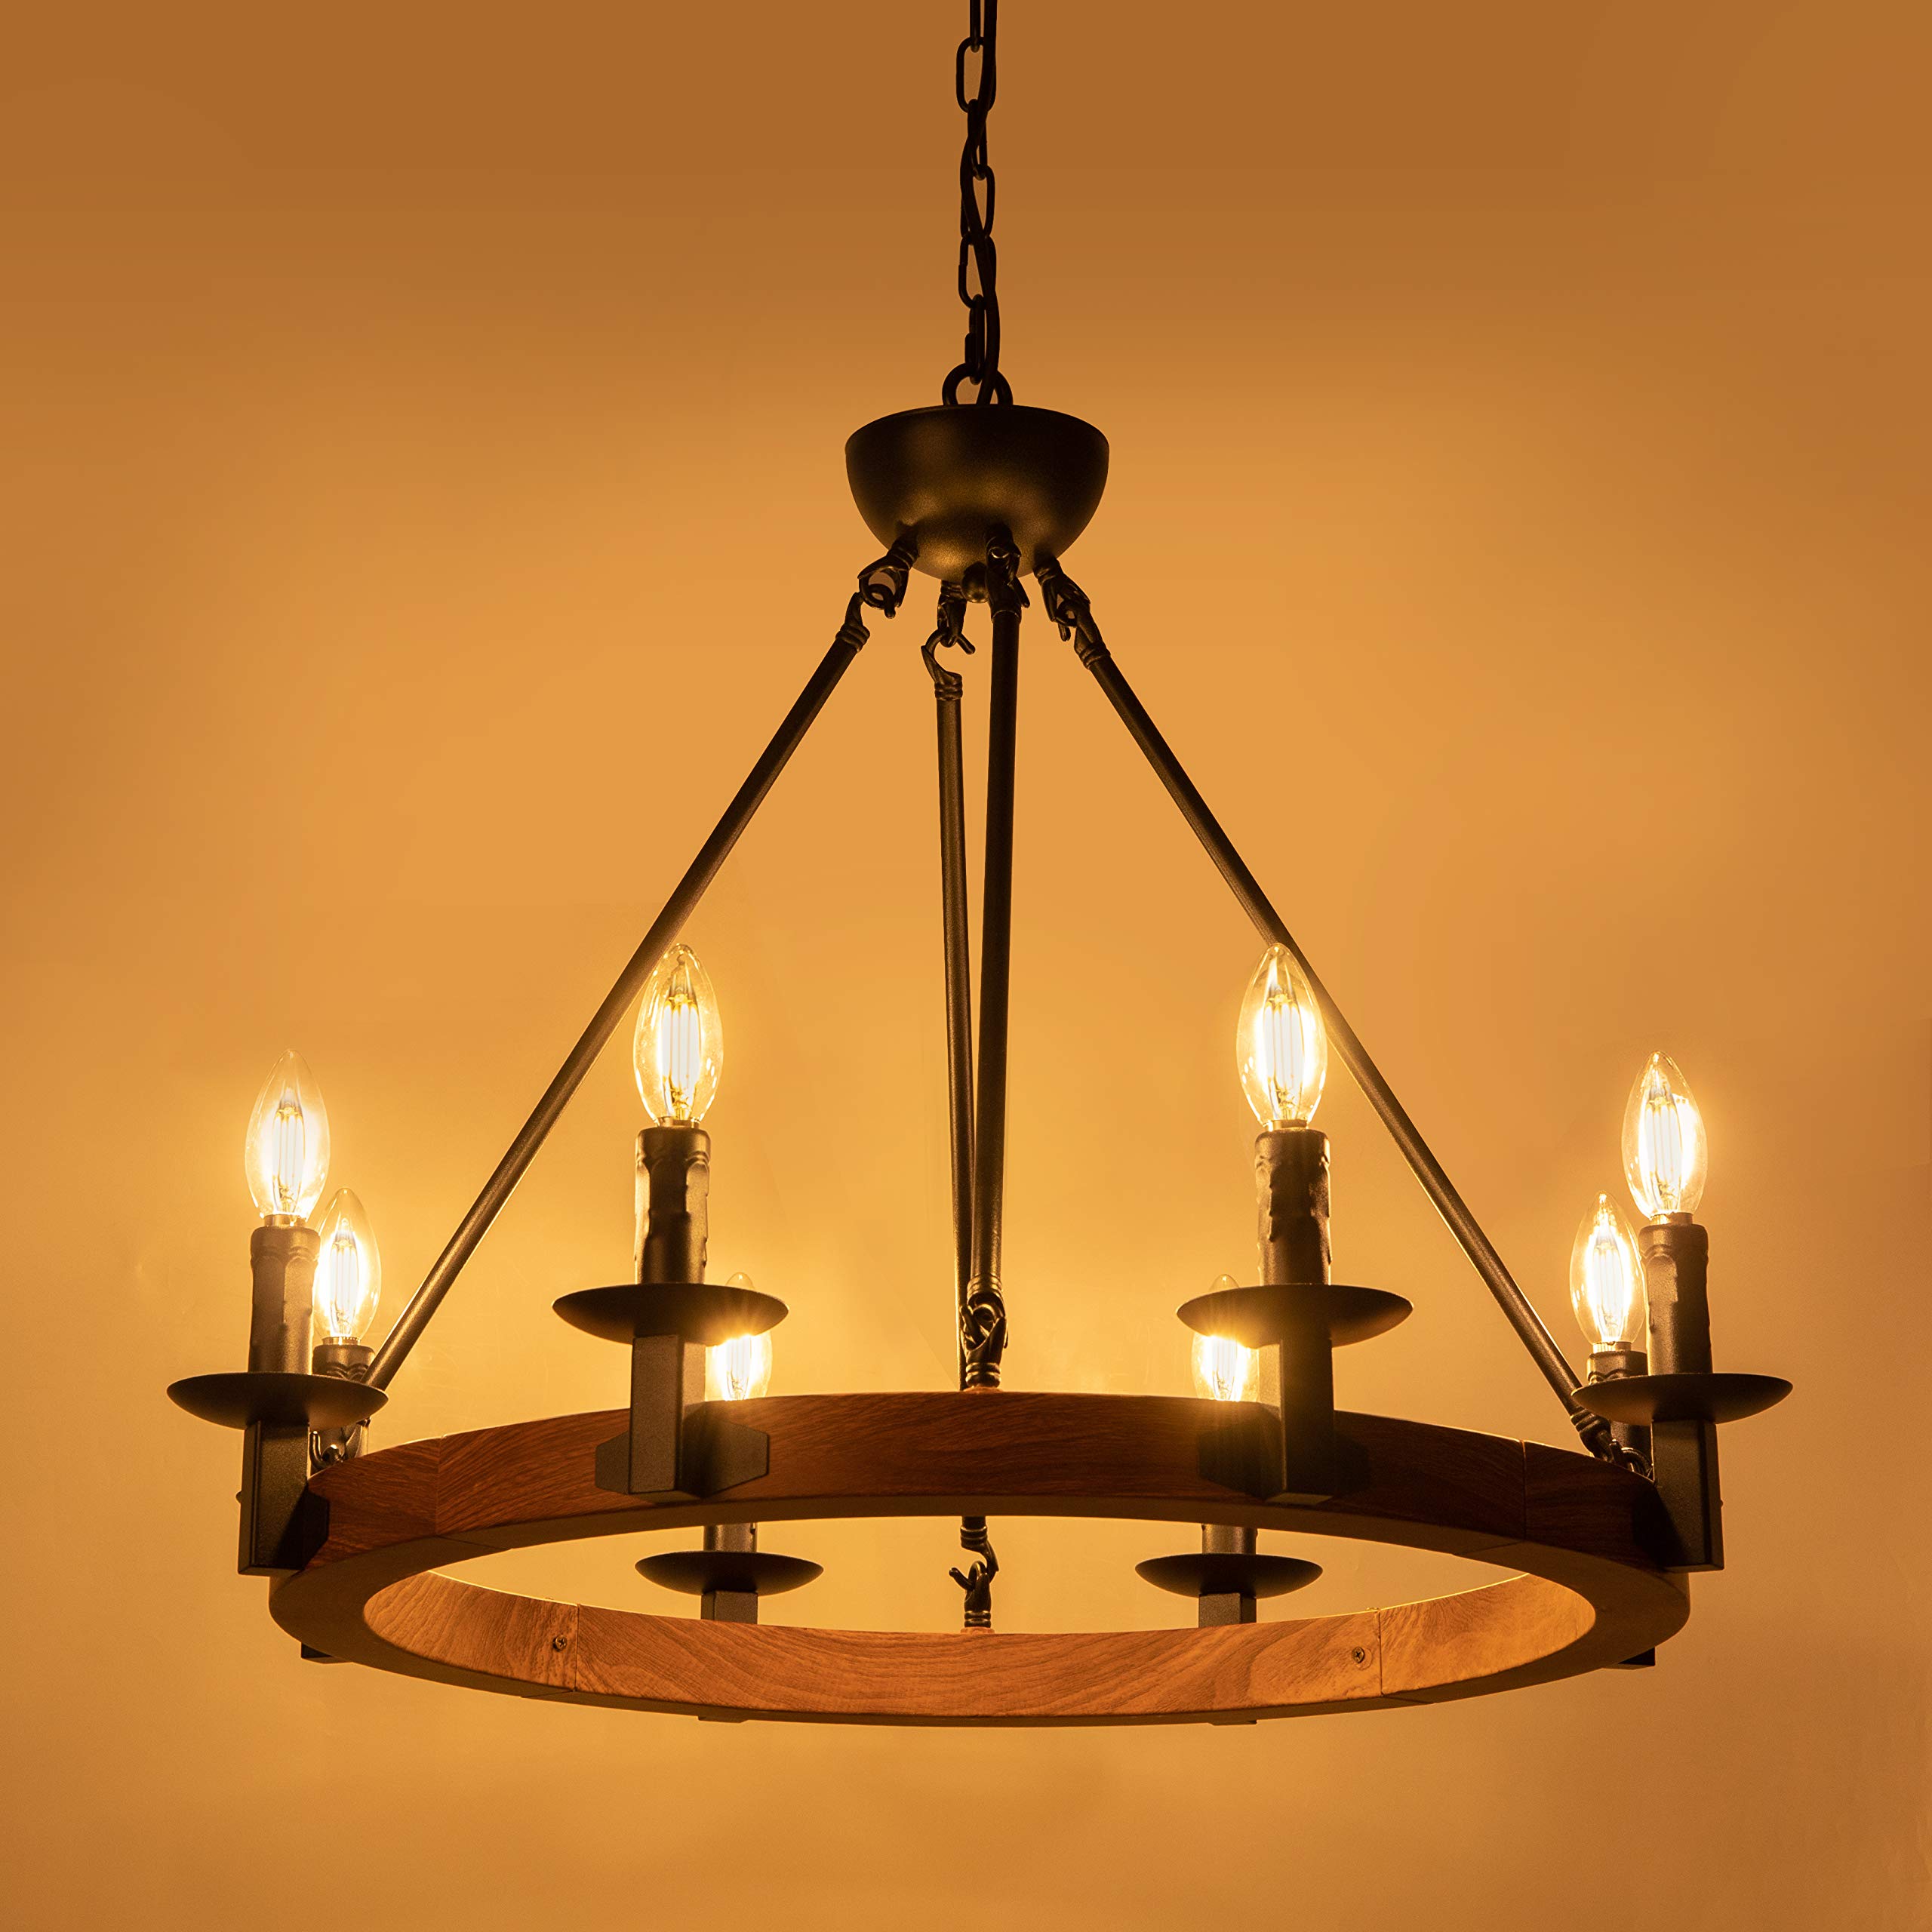 Wellmet 8 Lights Farmhouse Iron Chandeliers for Dining Rooms 28 Inch, Wagon Wheel Chandelier Candle Style, Rustic Hanging Ceiling Light Fixture Bedroom Living Room Foyer Hallway, Faux Wood Finish